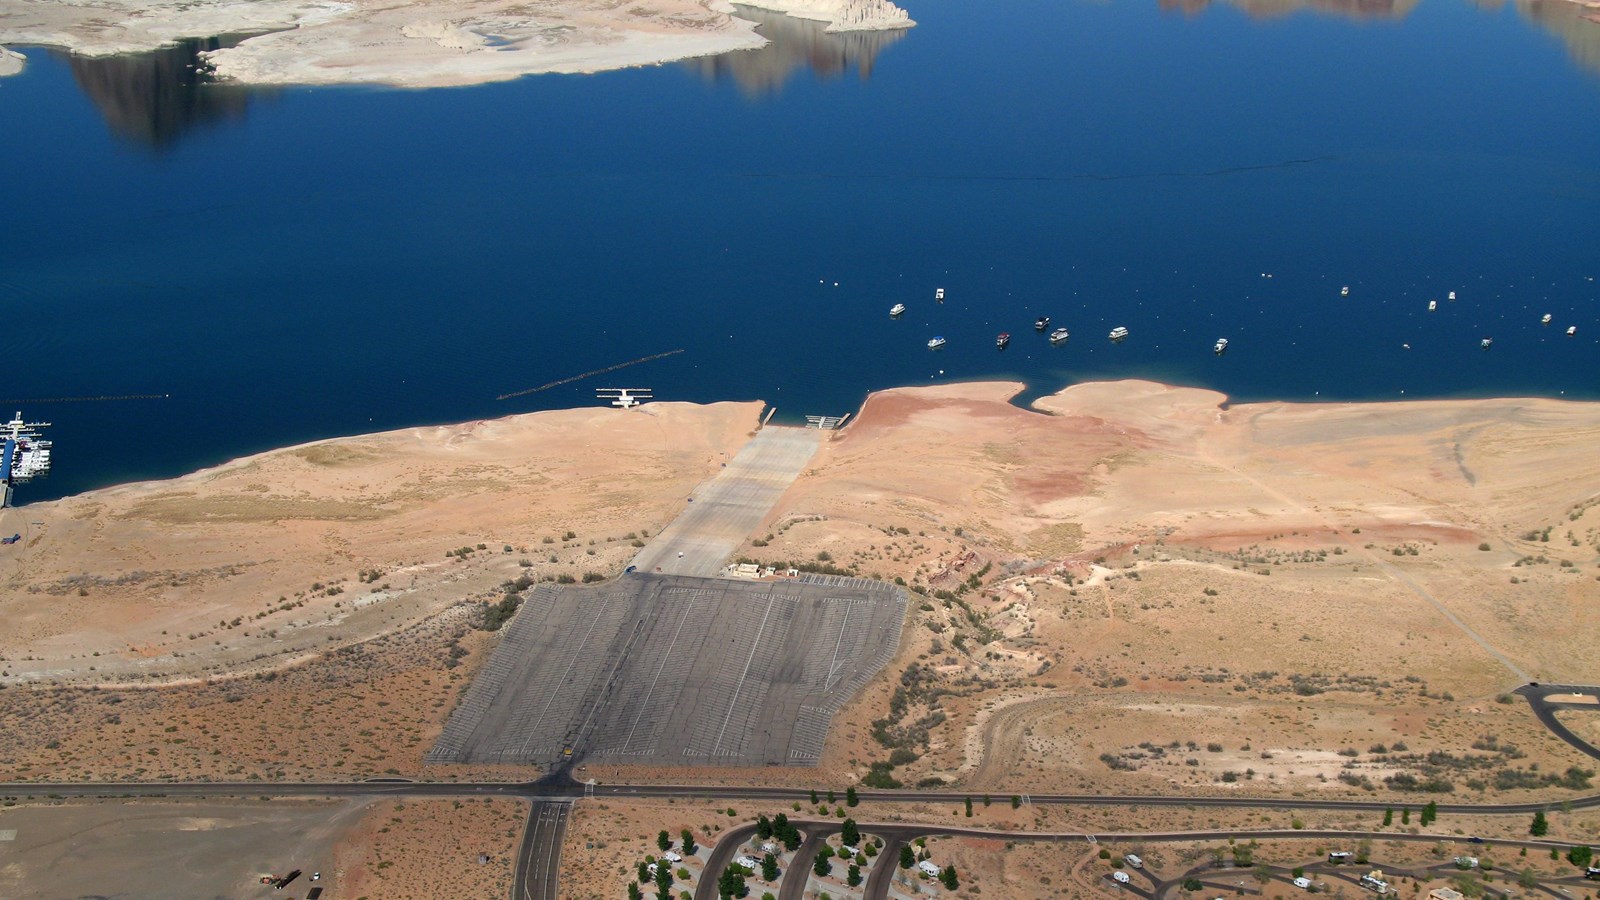 Aerial view of lake with roads, buildings, and launch ramp